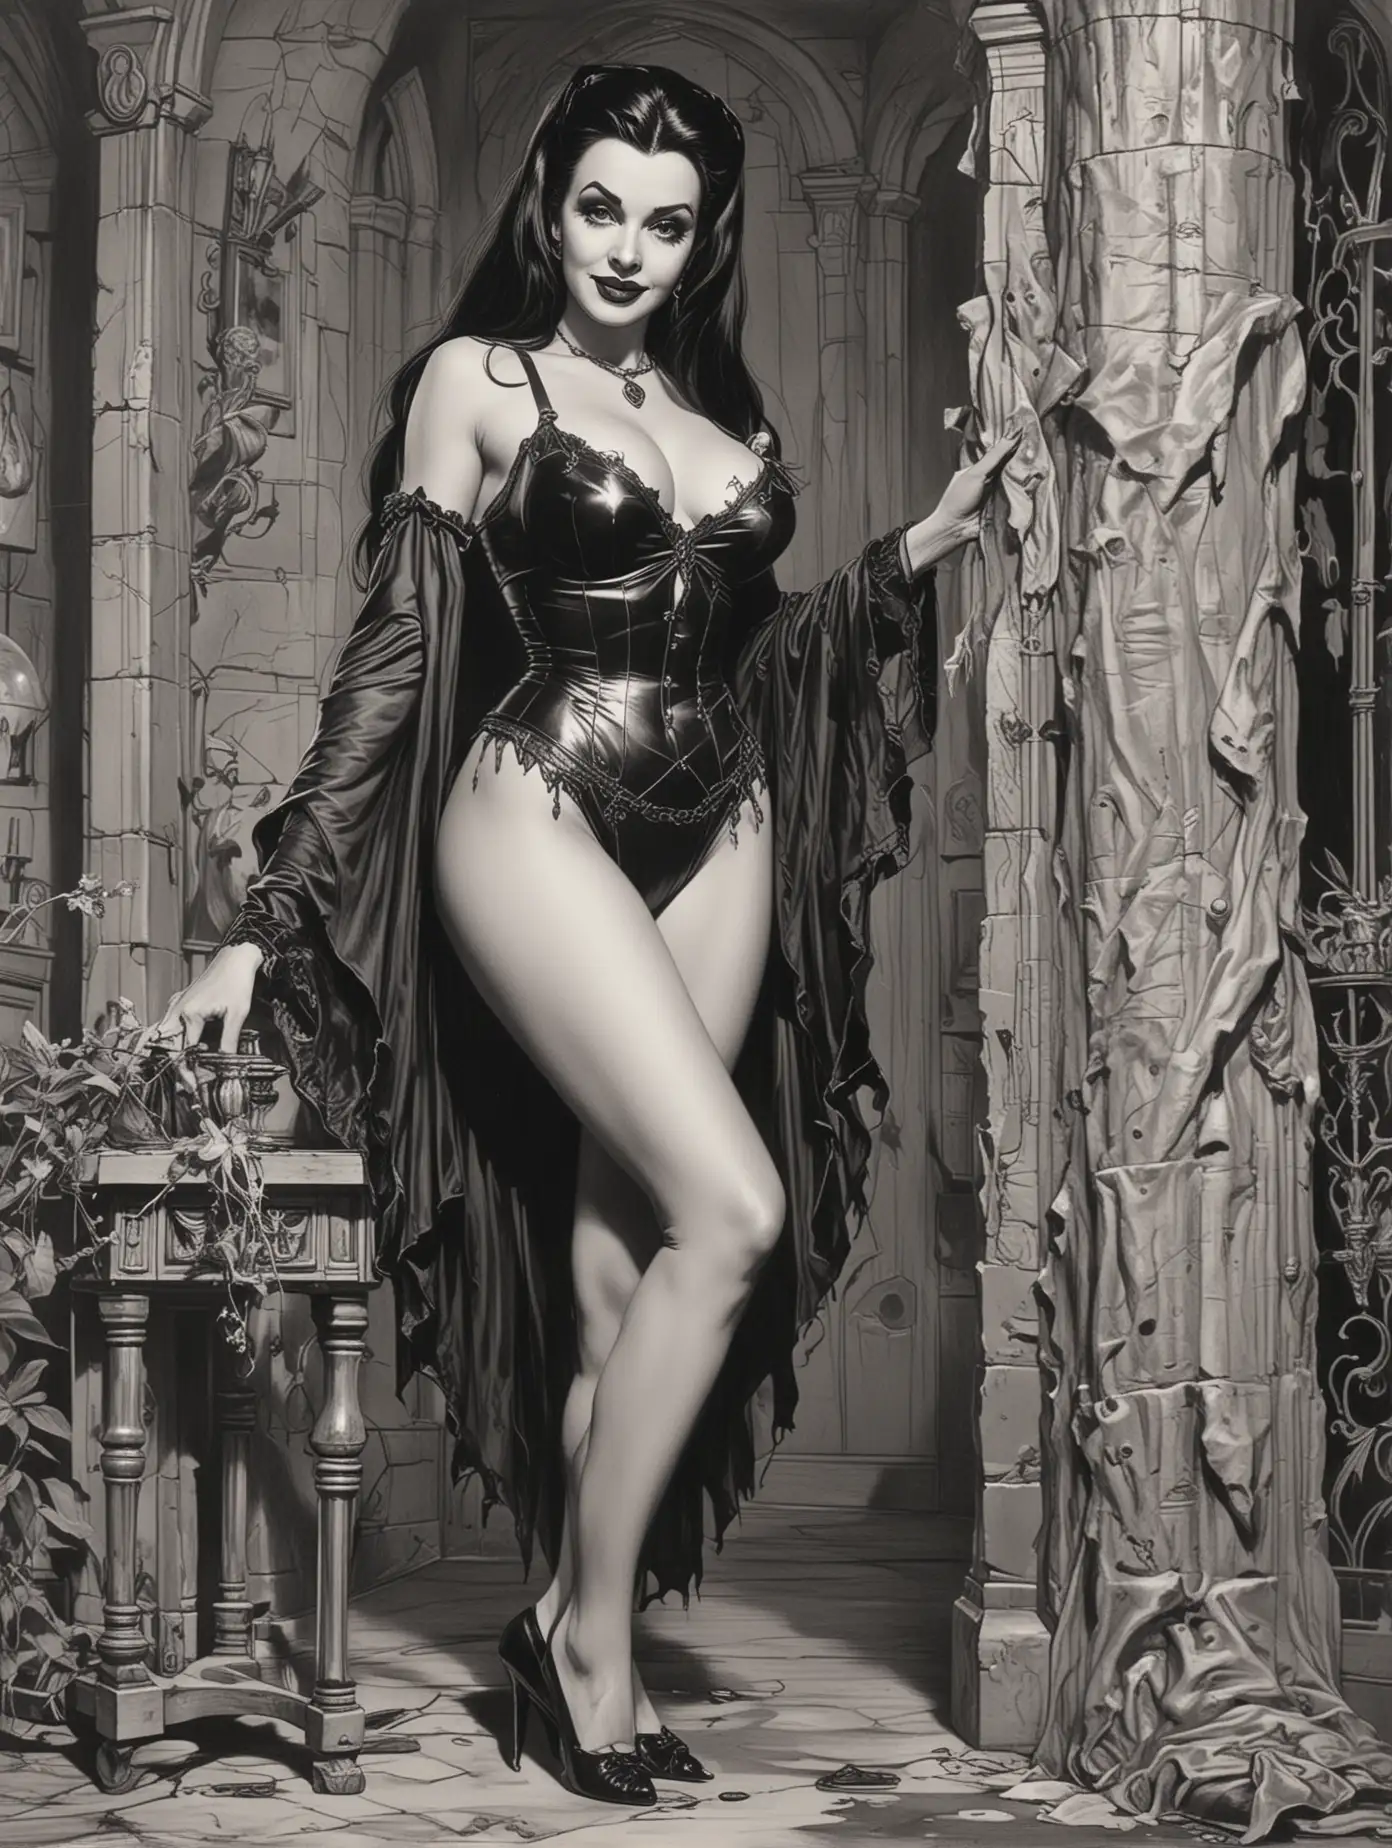 Lily Munster from The Munsters, Neal Adams artstyle, legs